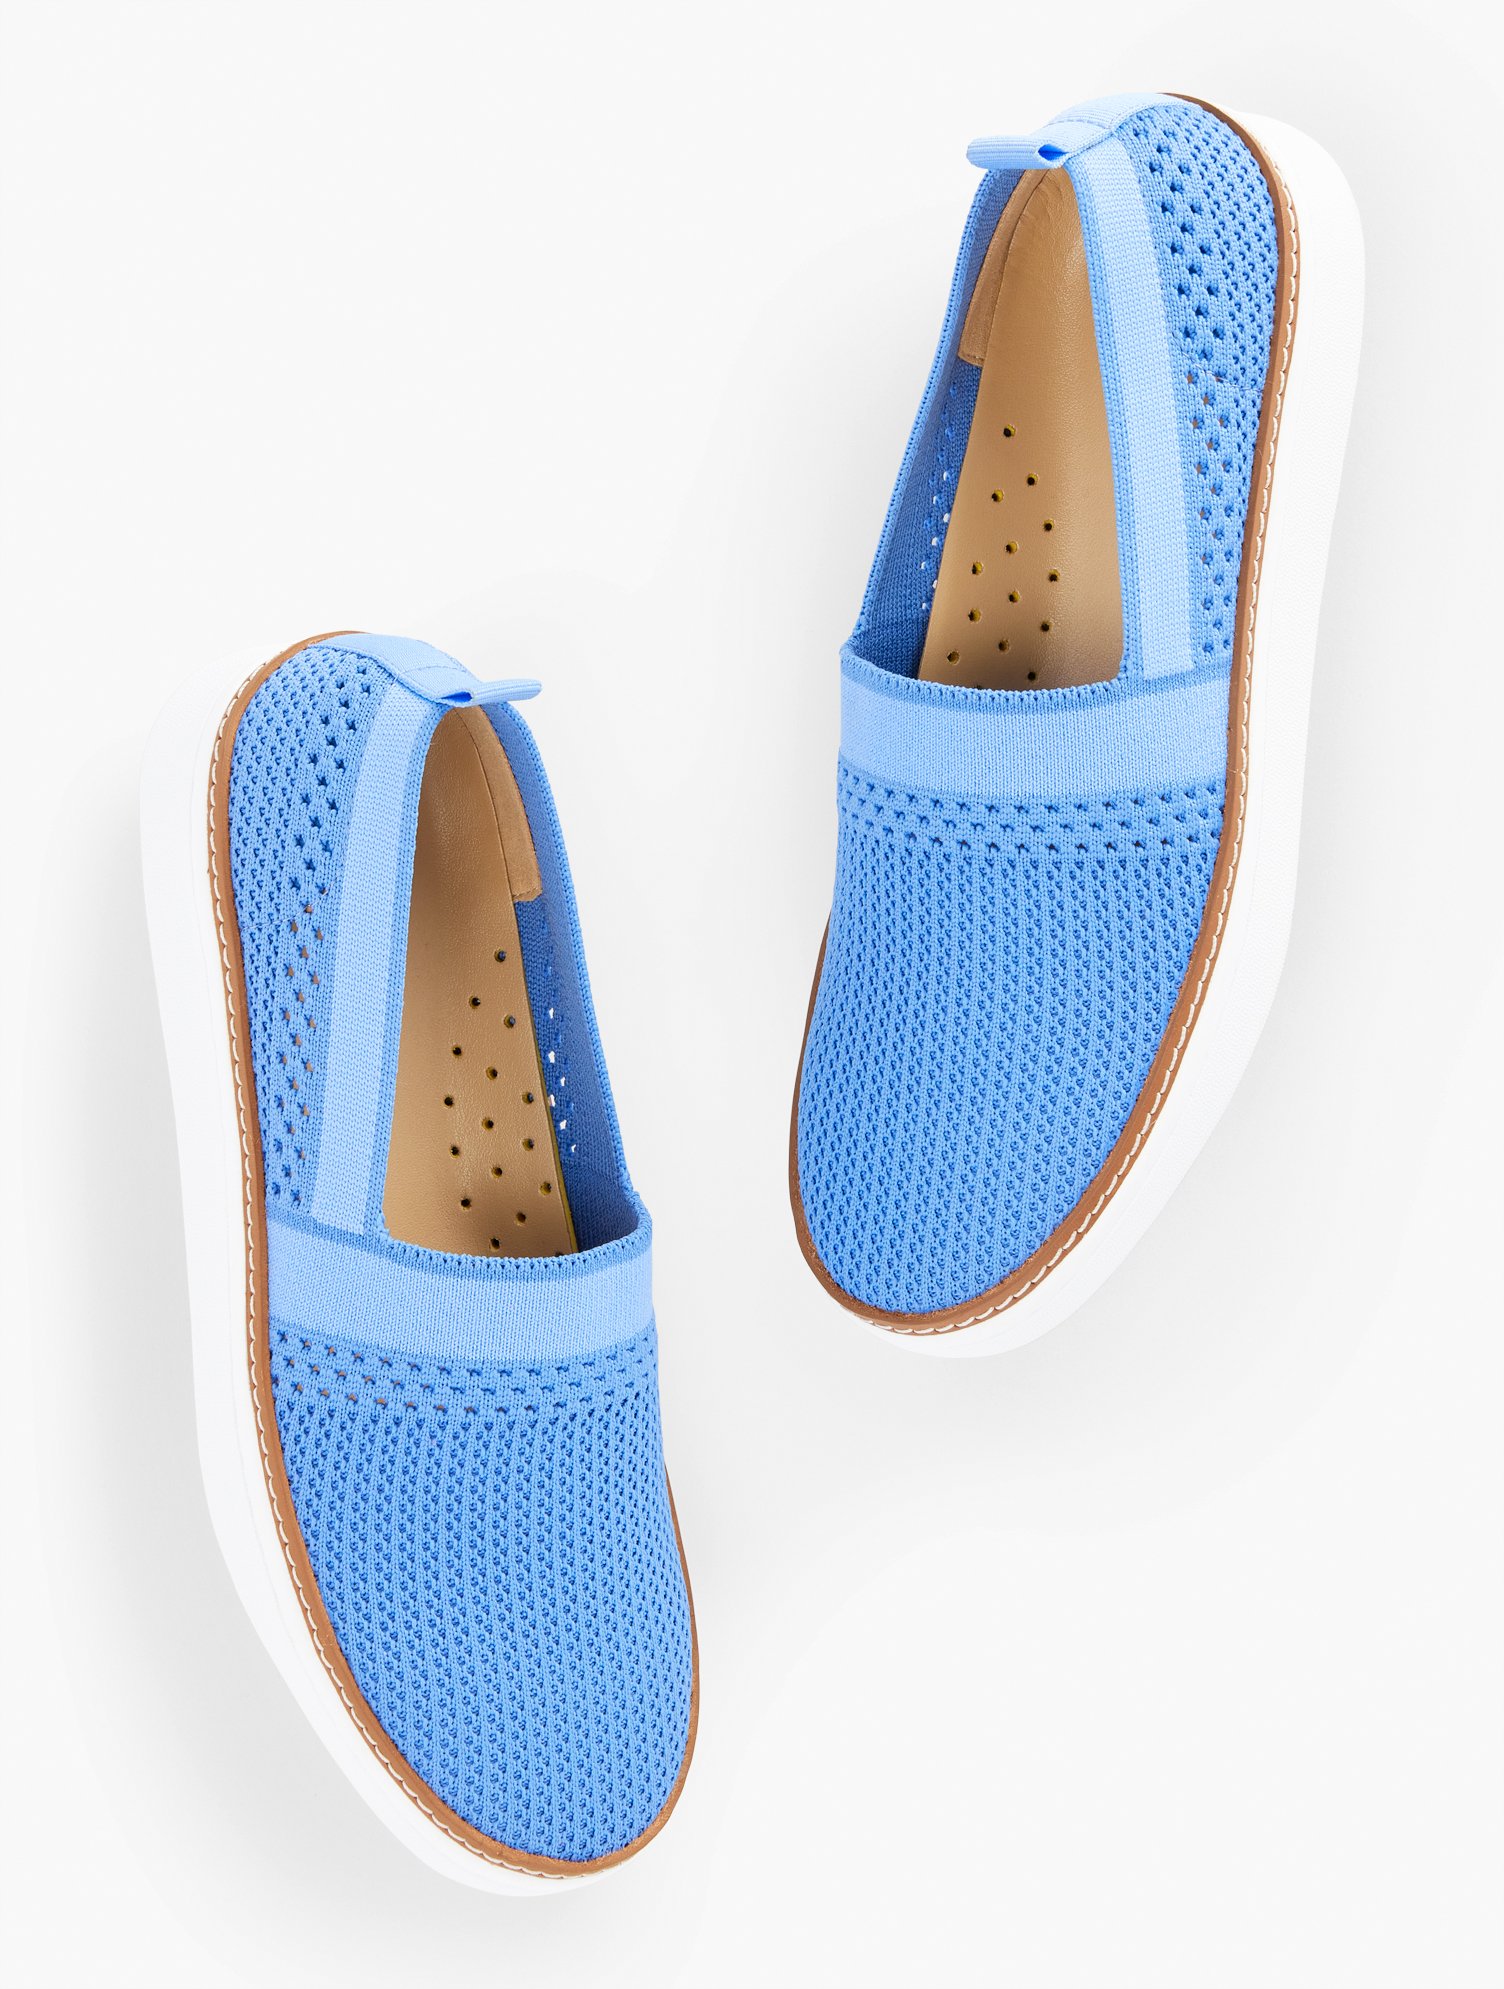 Talbots Brittany Knit Slip-on Sneakers - Blue Iris/blue Sky - 8 1/2 M - 100% Cotton  In Blue Iris,blue Sky